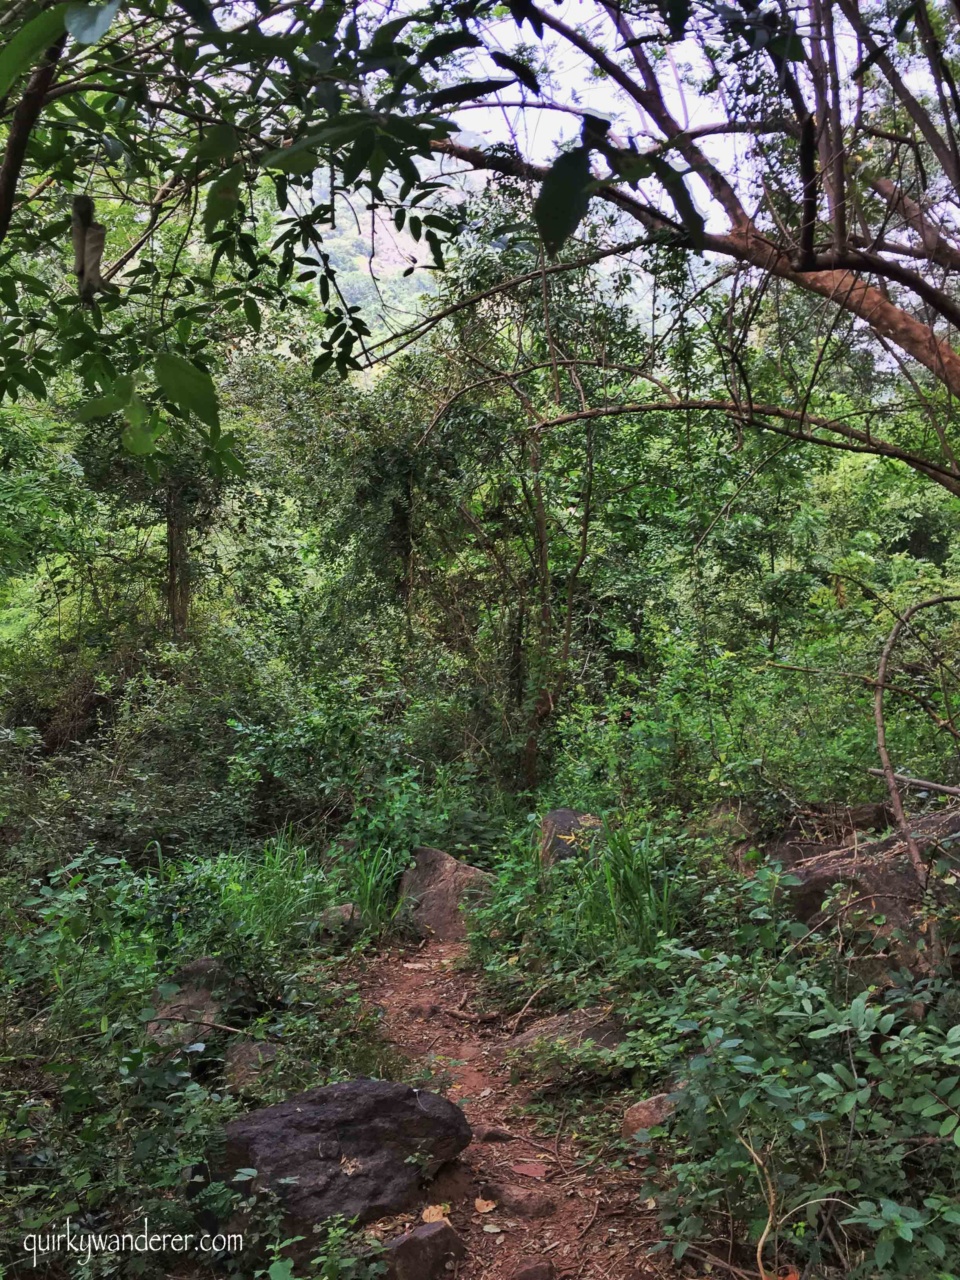 Kamarajar valley near Madurai is an offbeat getaway for those seeking serenity and quiet. This travelogue talks about an adventurous lesser known trek in Palani hills arranged by the Double Dutch resort.